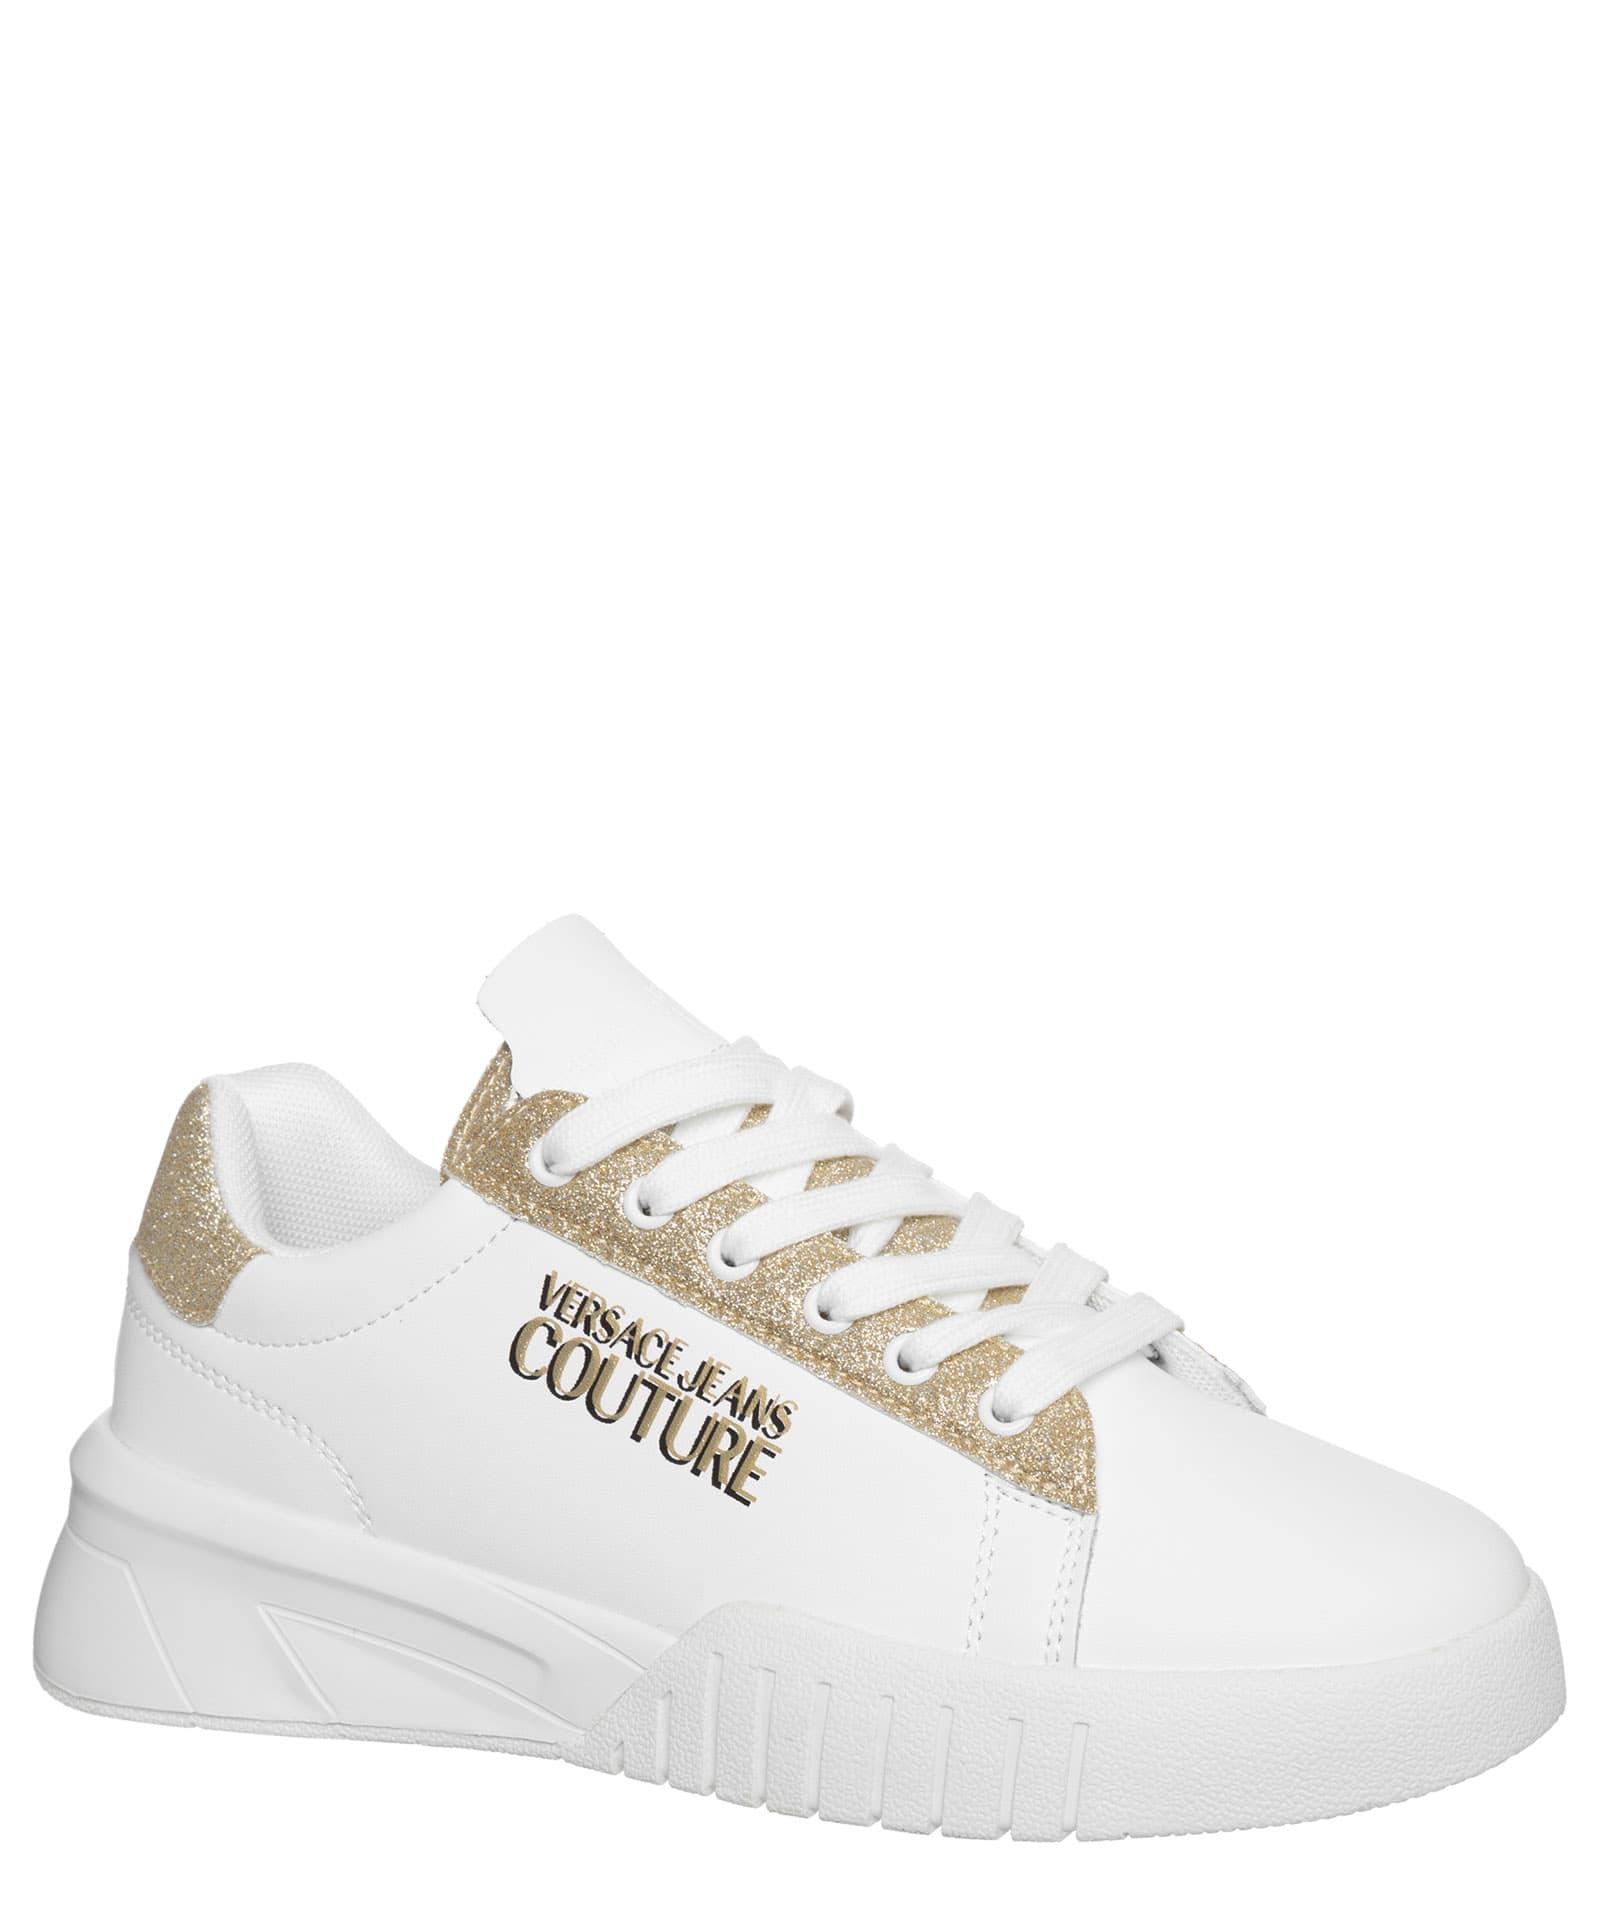 Versace Jeans Couture Uptown Sneakers in White | Lyst